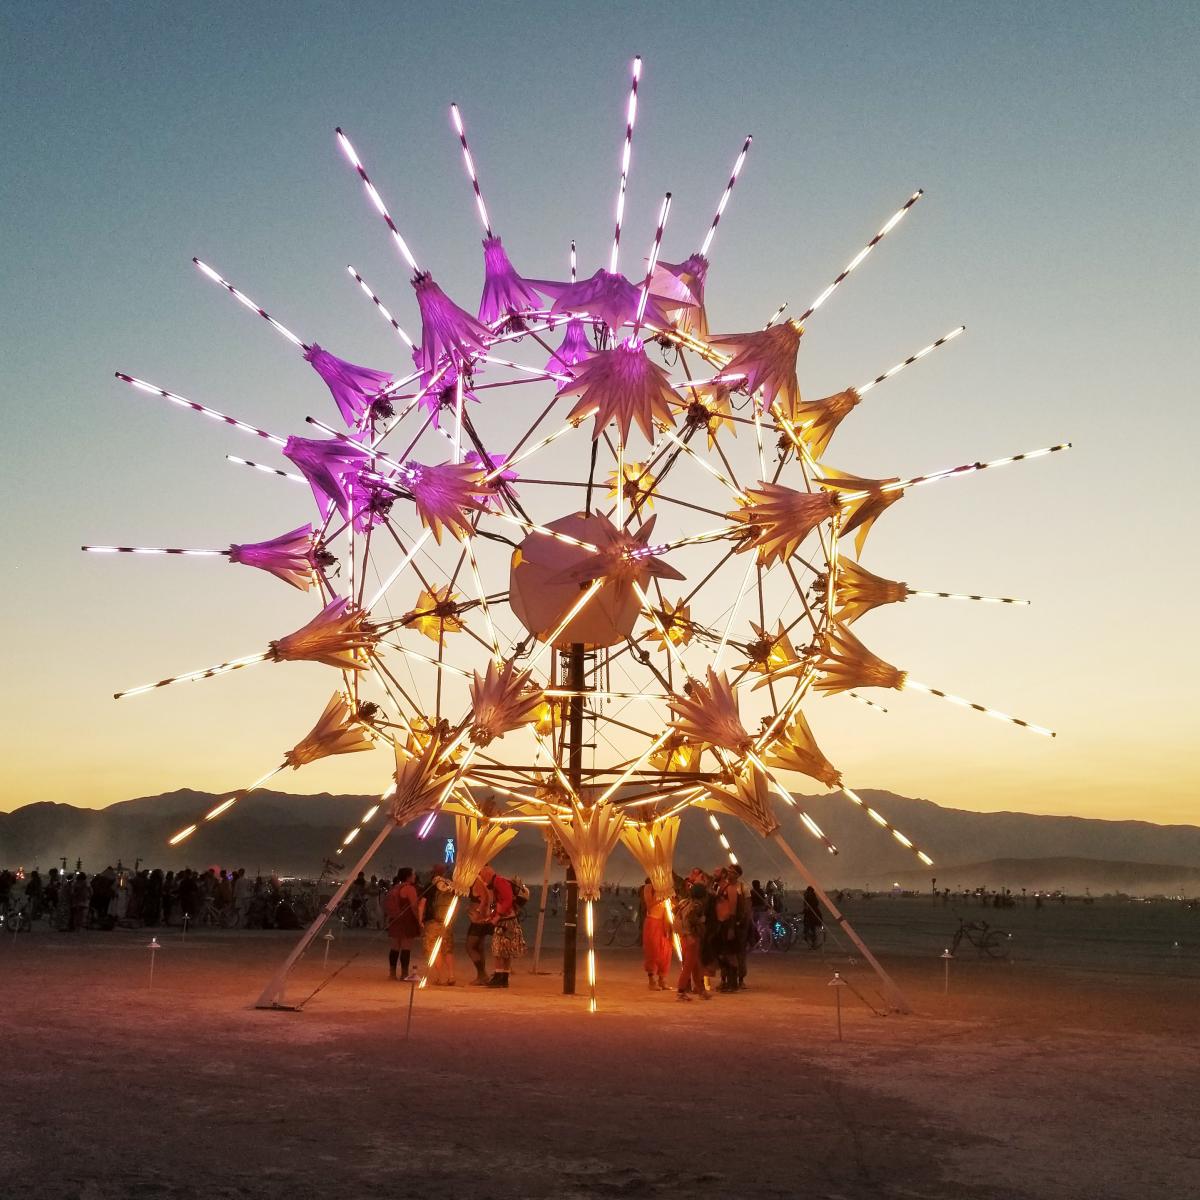 A photograph of a circular artwork with LED lights at night in the desert.